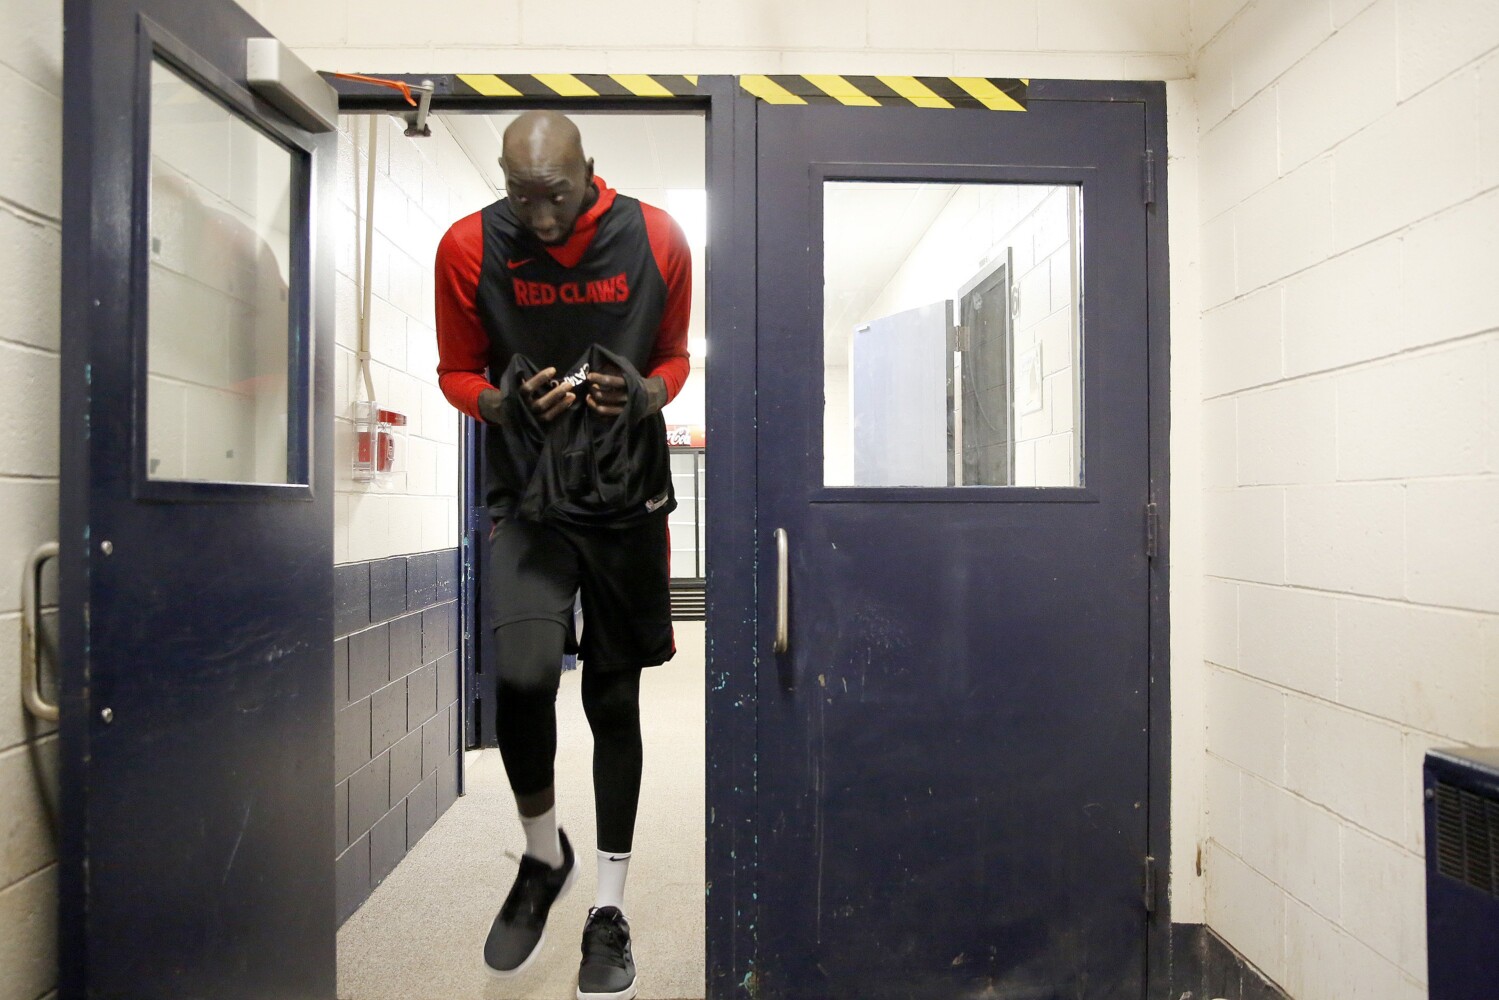 Tacko Fall once again steals the show, this time in Maine